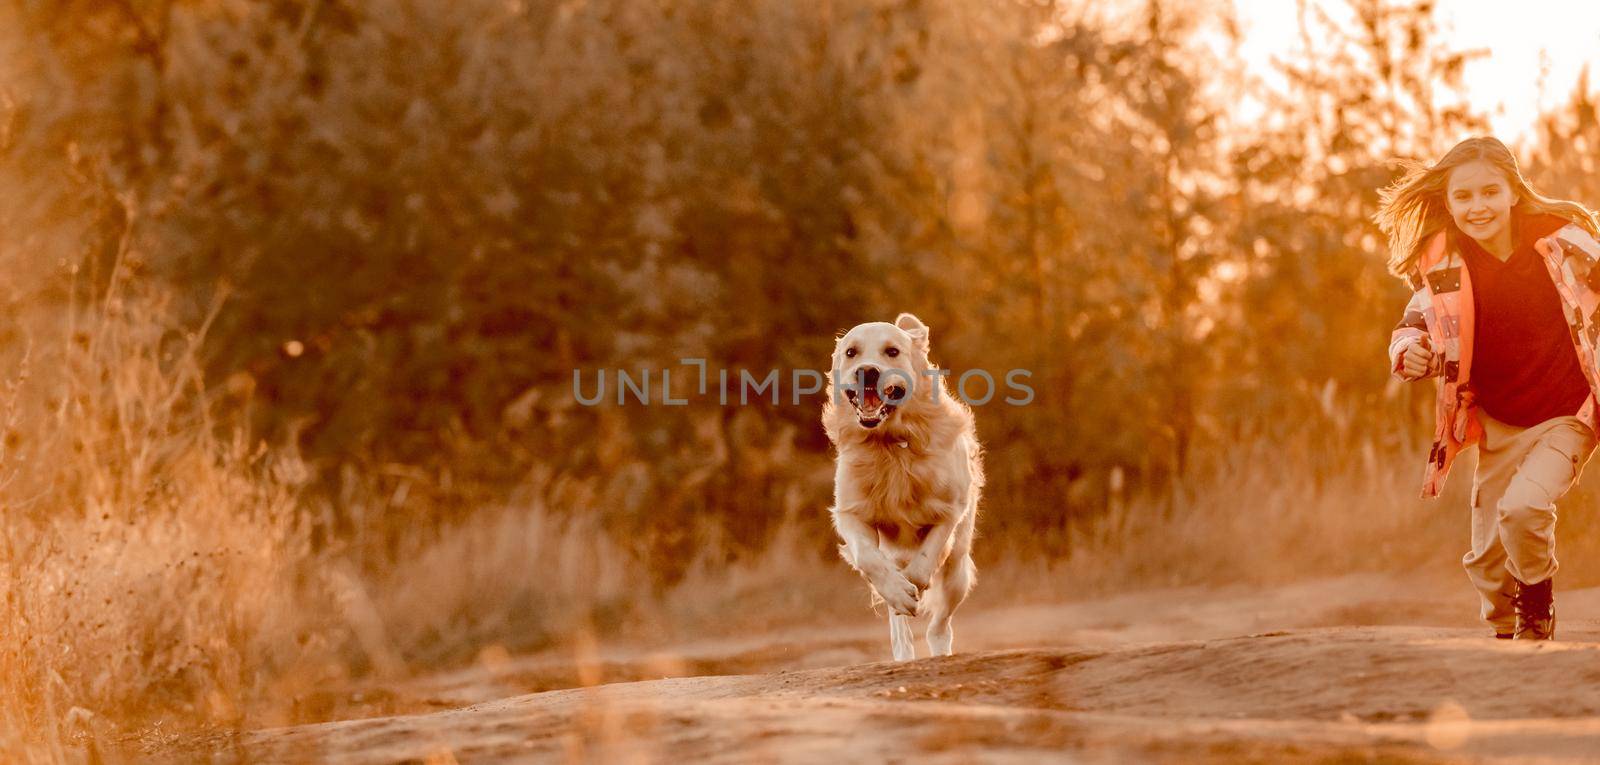 Little girl child with golden retriever dog running in sunset time outdoors. Kid with doggy pet labrador having fun at autumn nature together